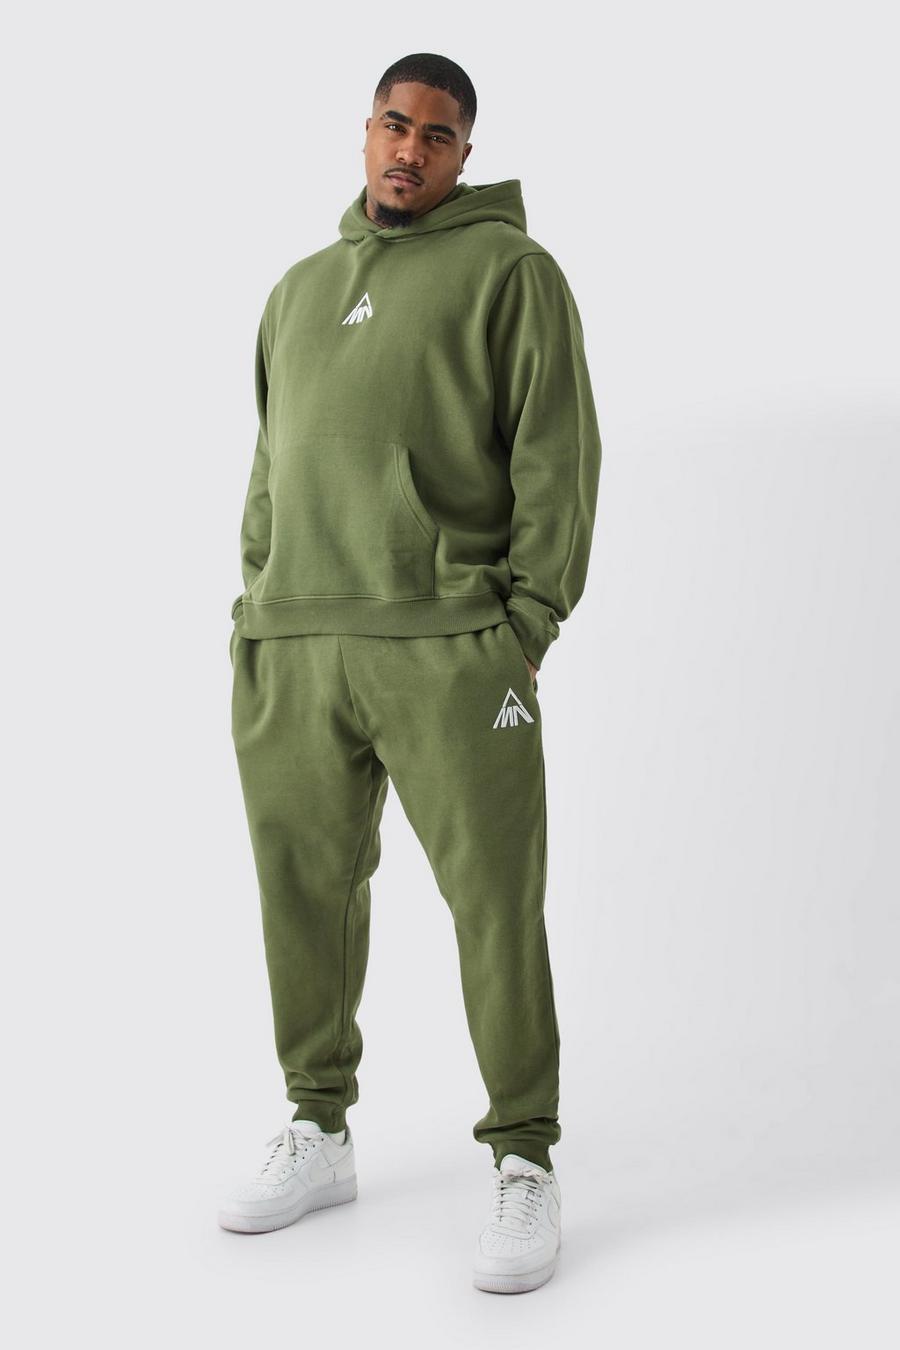 AMDBEL Sweatsuits for Men Big And Tall,Mens Tracksuit 2